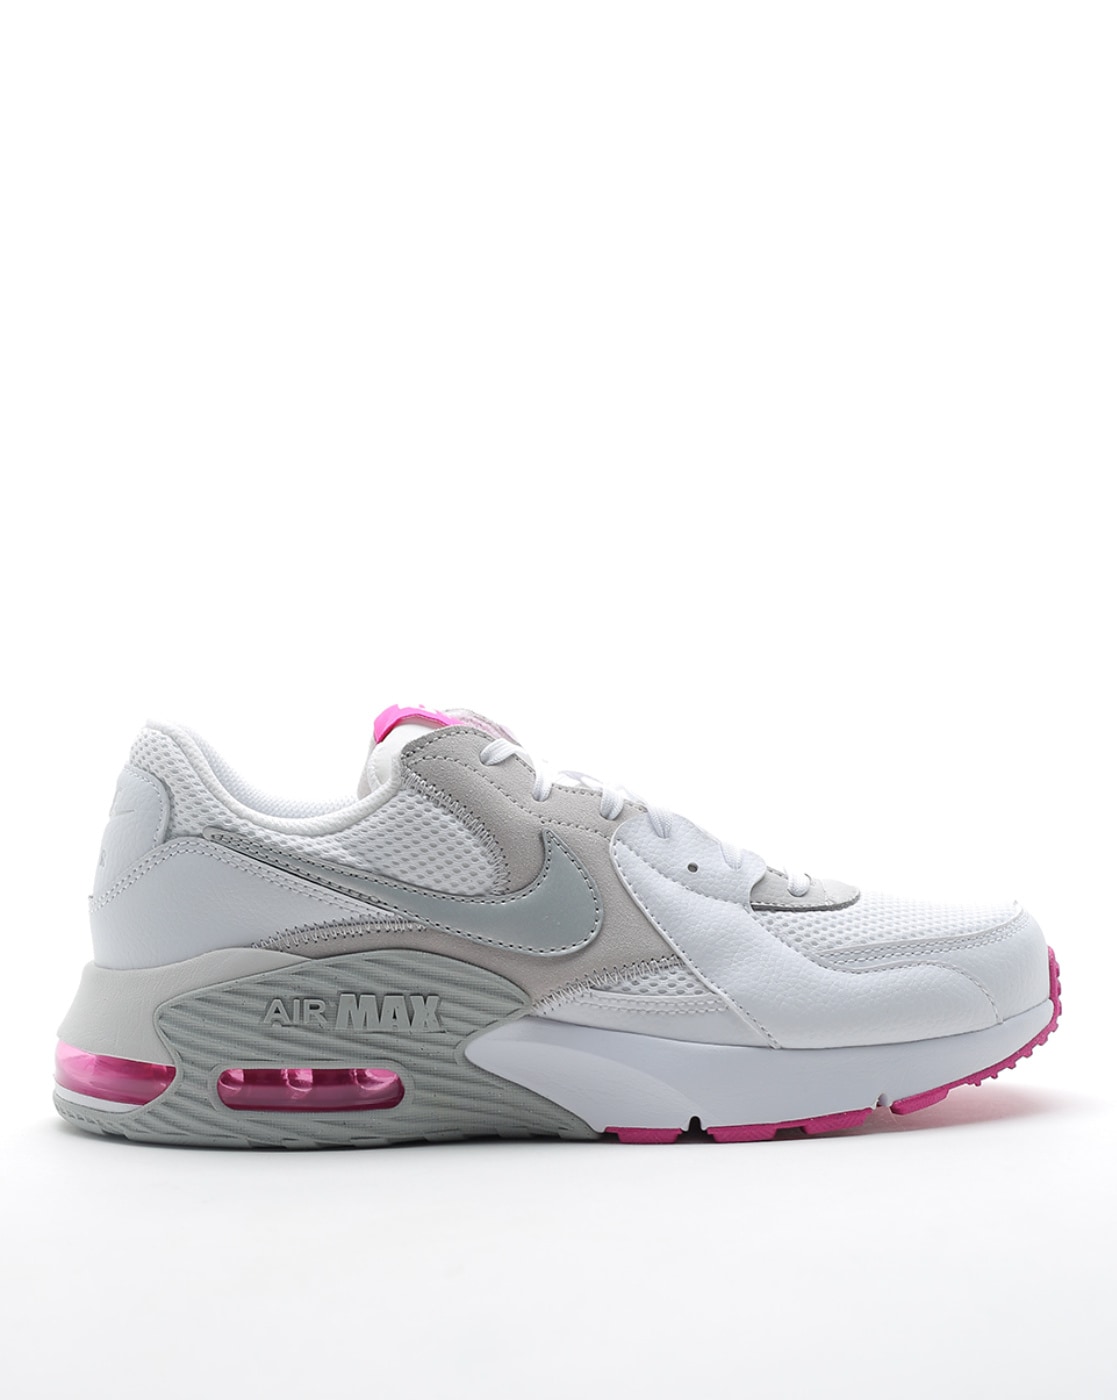 nike glow shoes available store in bangalore today - nike air max